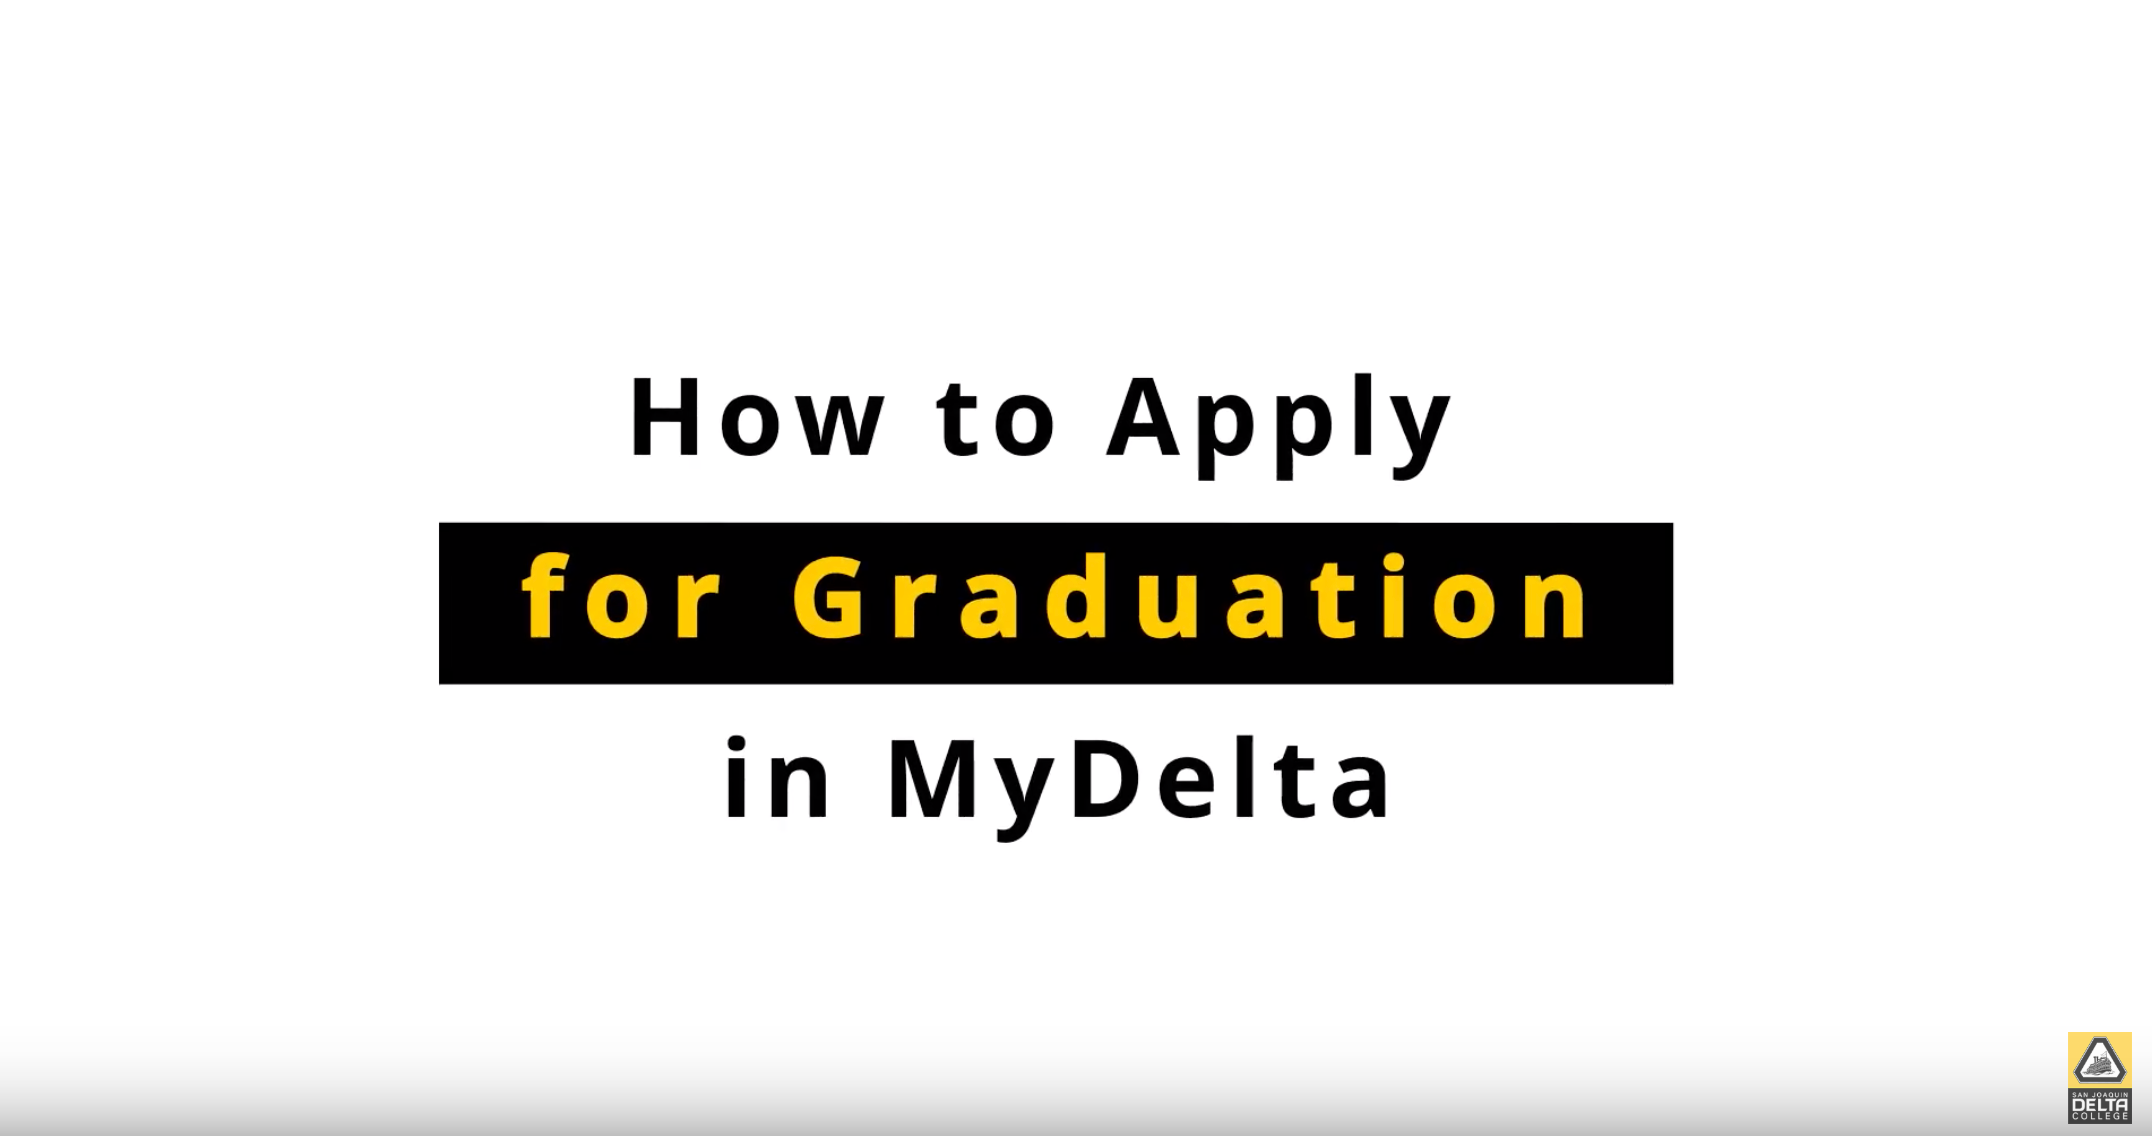 How to Apply for Graduation in MyDelta